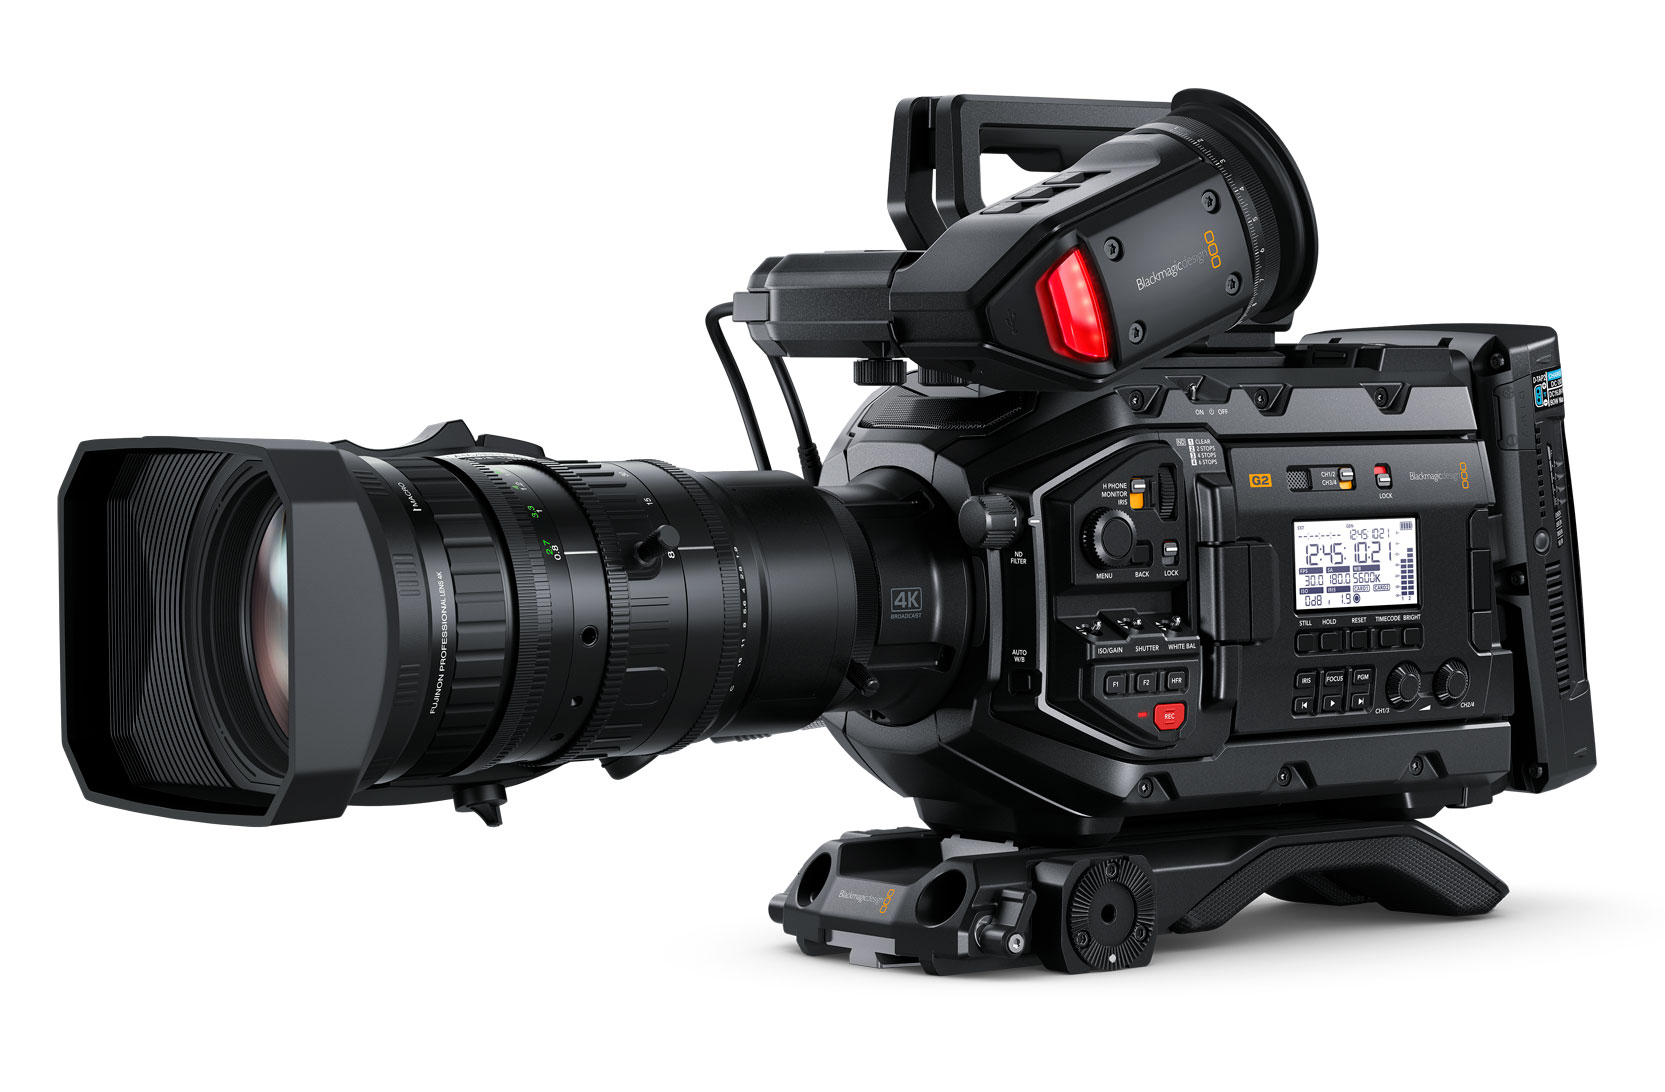 New Jack-of-all-trades from Blackmagic - URSA Broadcast G2